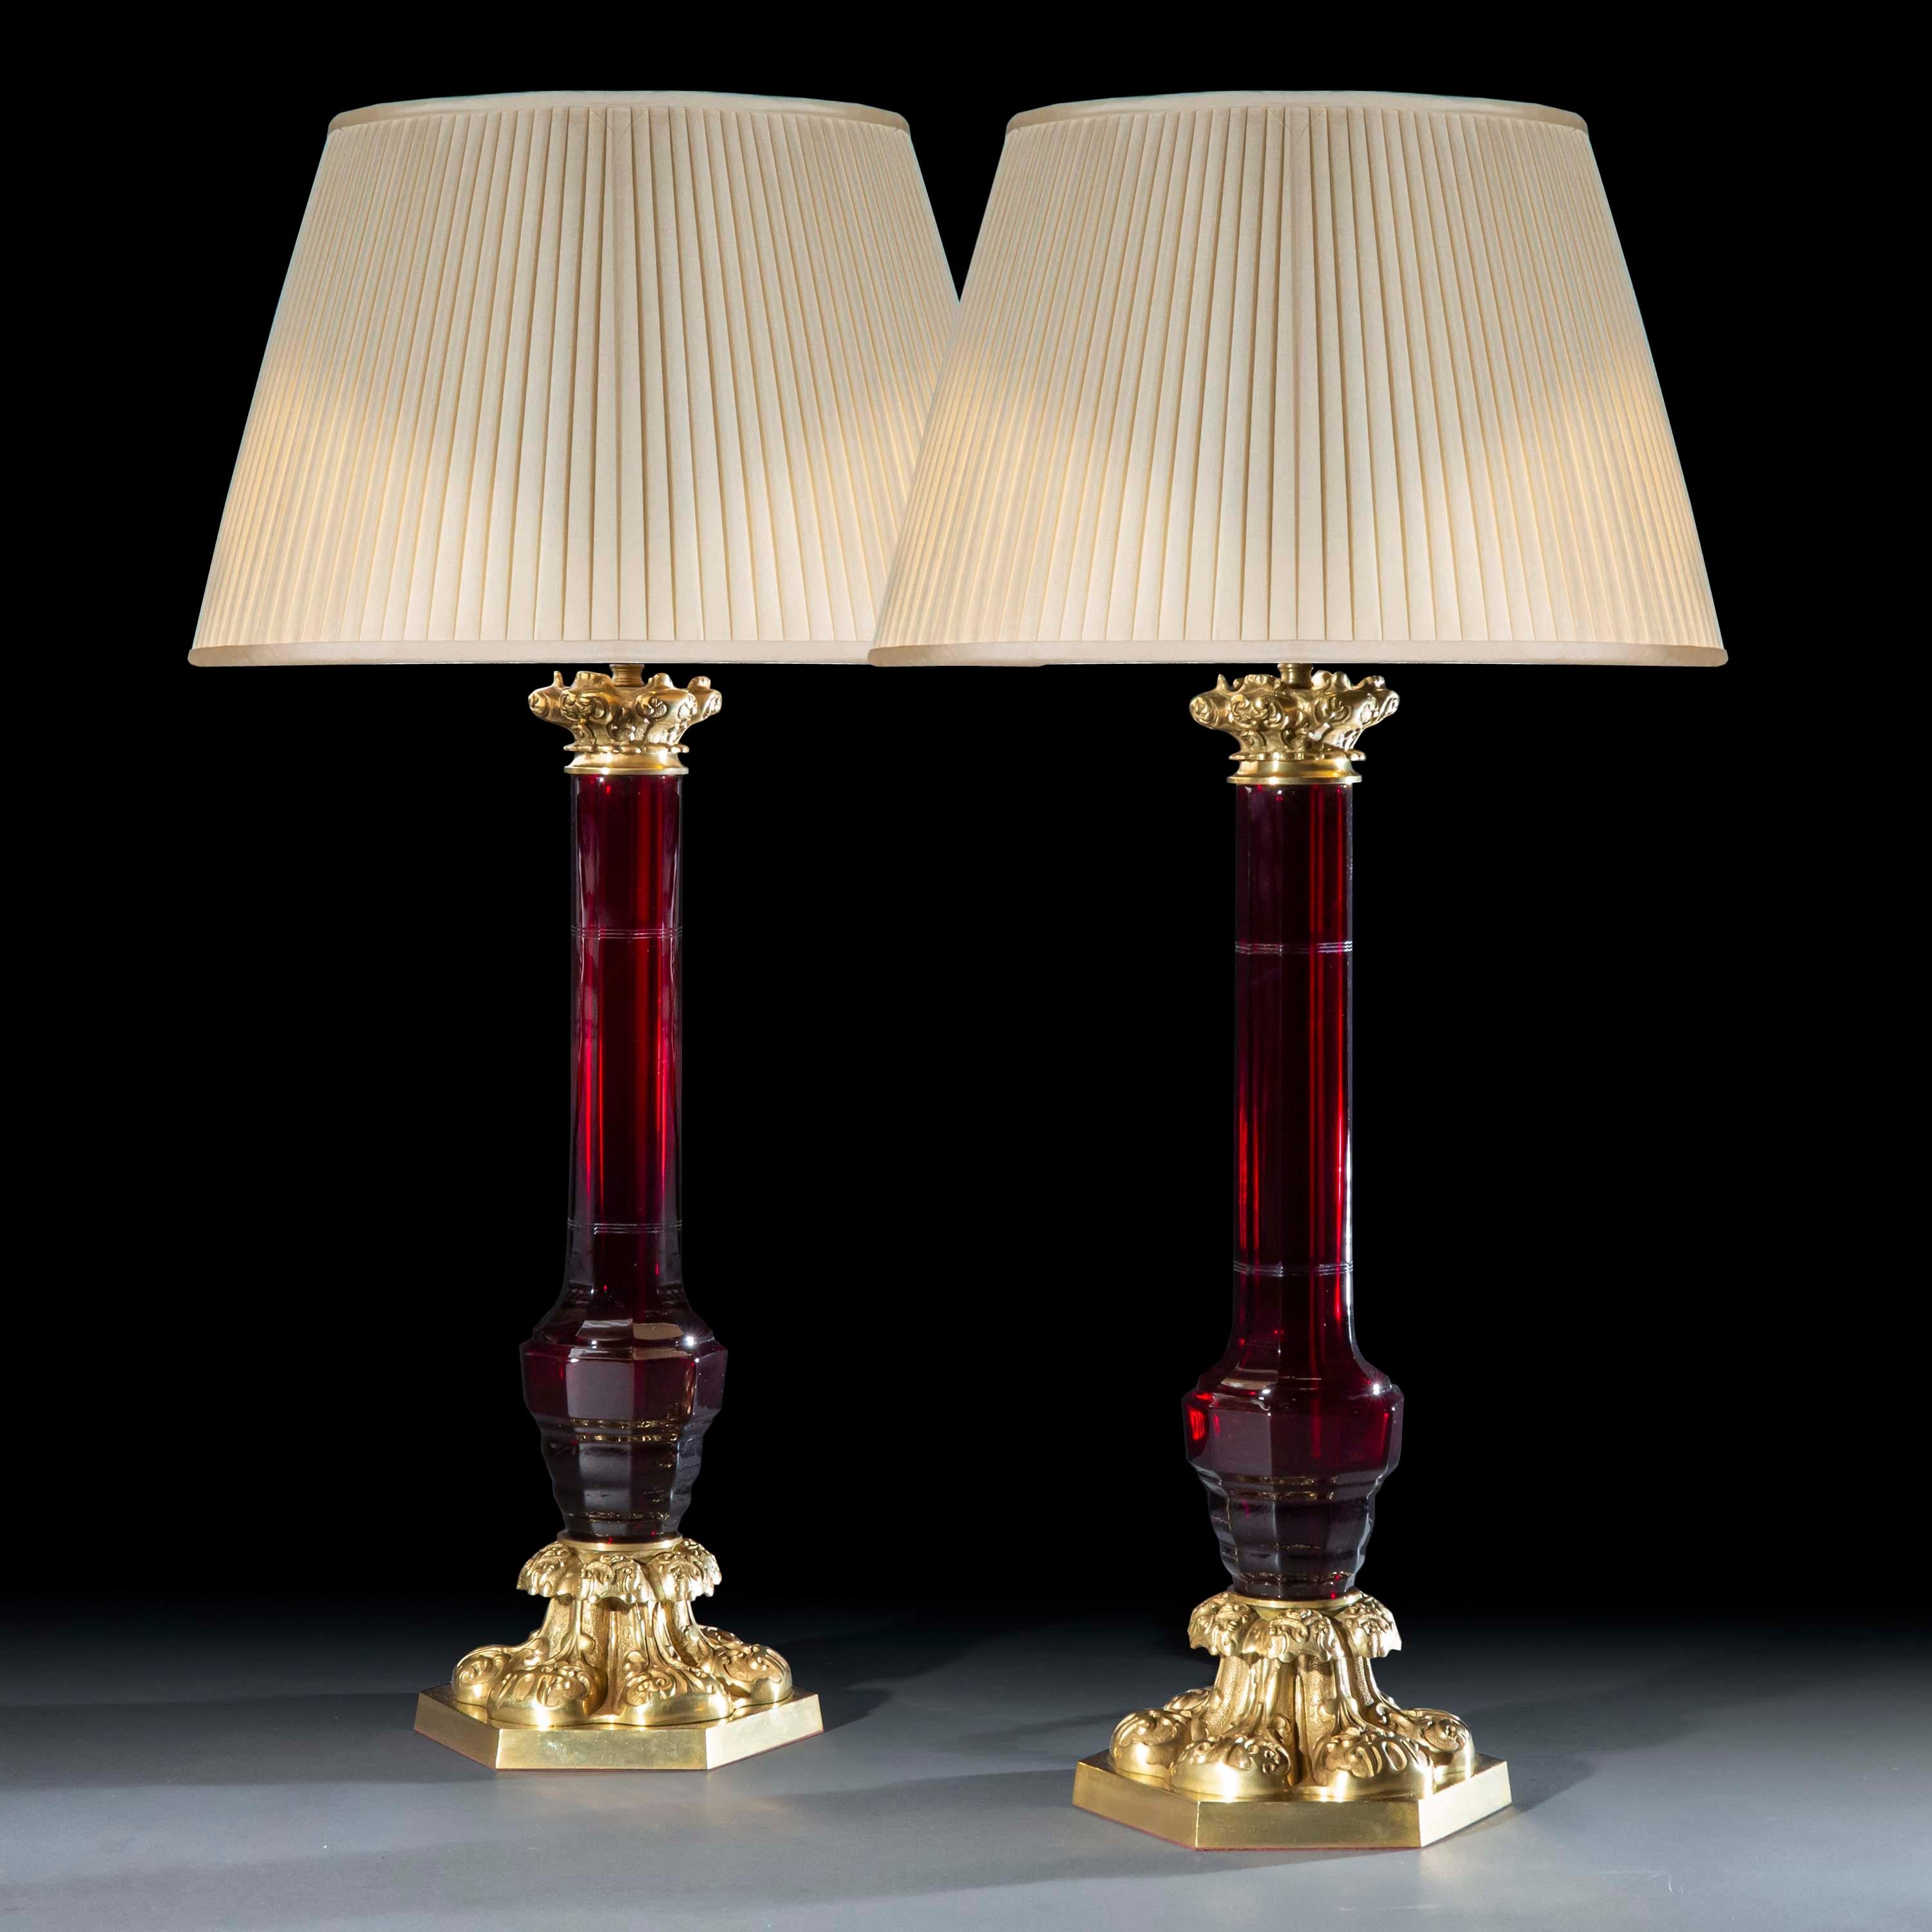 An opulent pair of ruby glass and brass table lamps of superb quality, fashioned as 19th century late Regency – early Victorian oil lamps.
England, mid-20th century.

Why we like them
We like their baroque exuberance and the superb, handmade